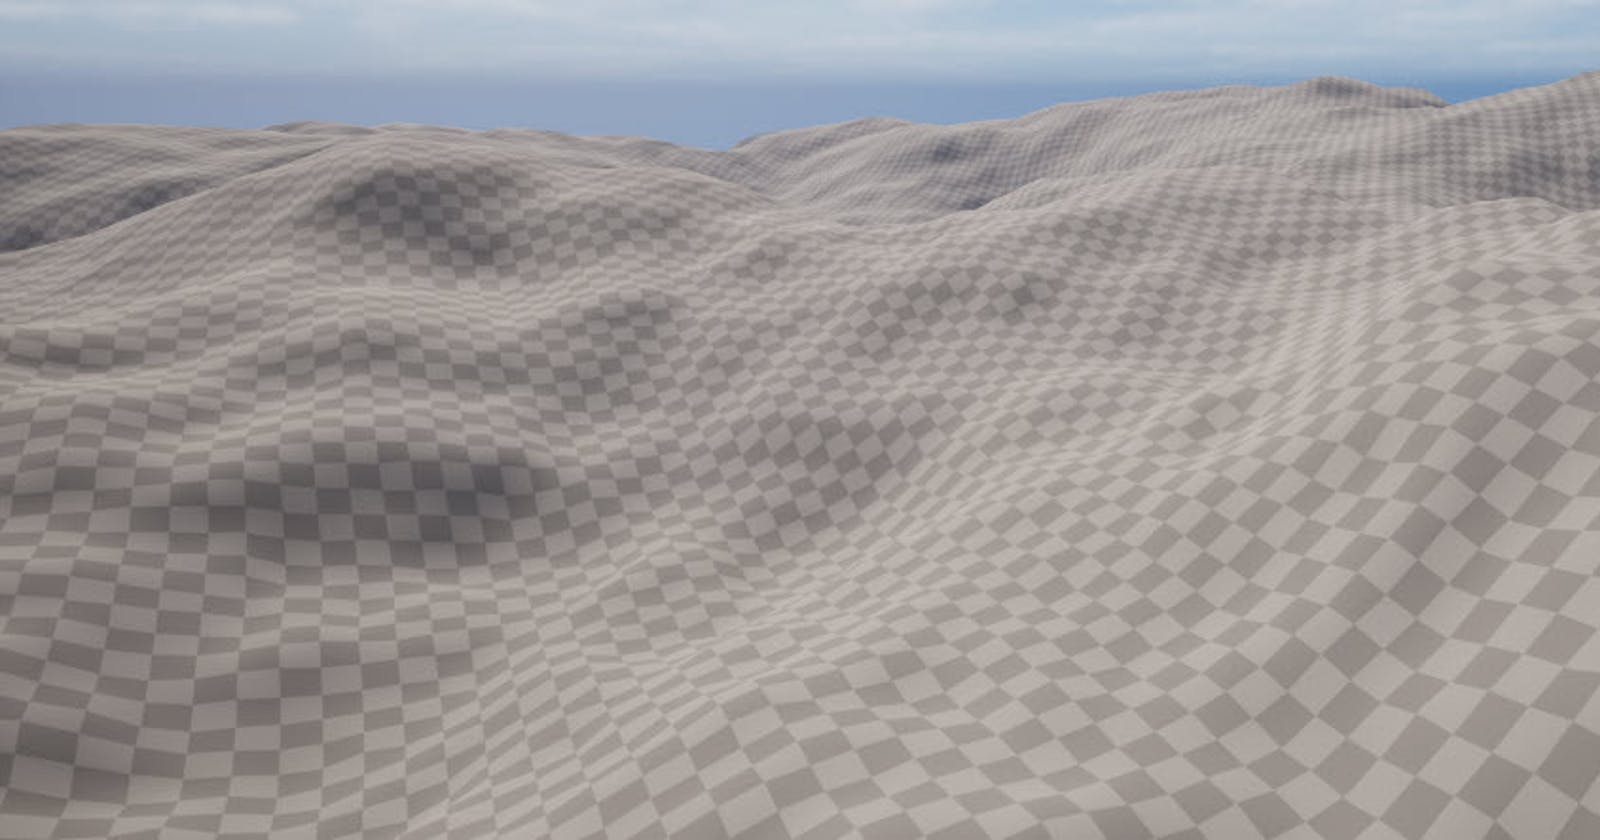 How to create procedural hills for your landscape in Unreal Engine